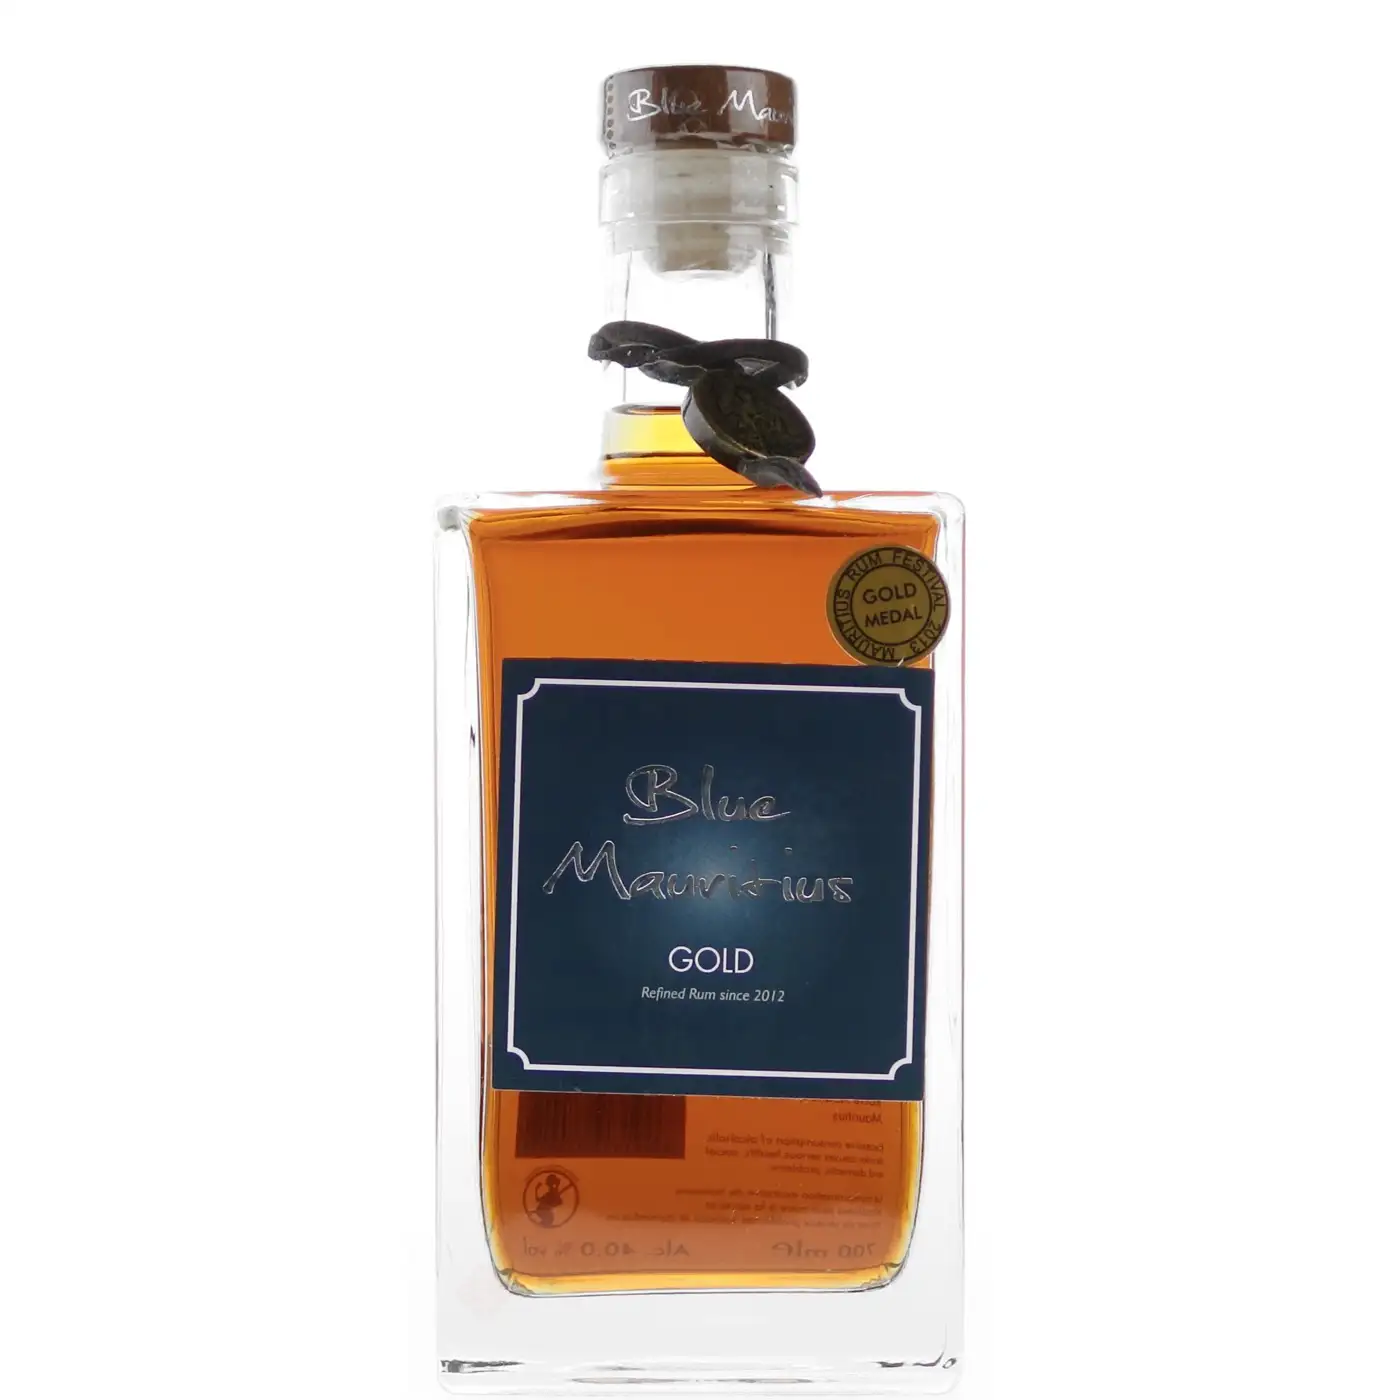 Image of the front of the bottle of the rum Blue Mauritius Gold